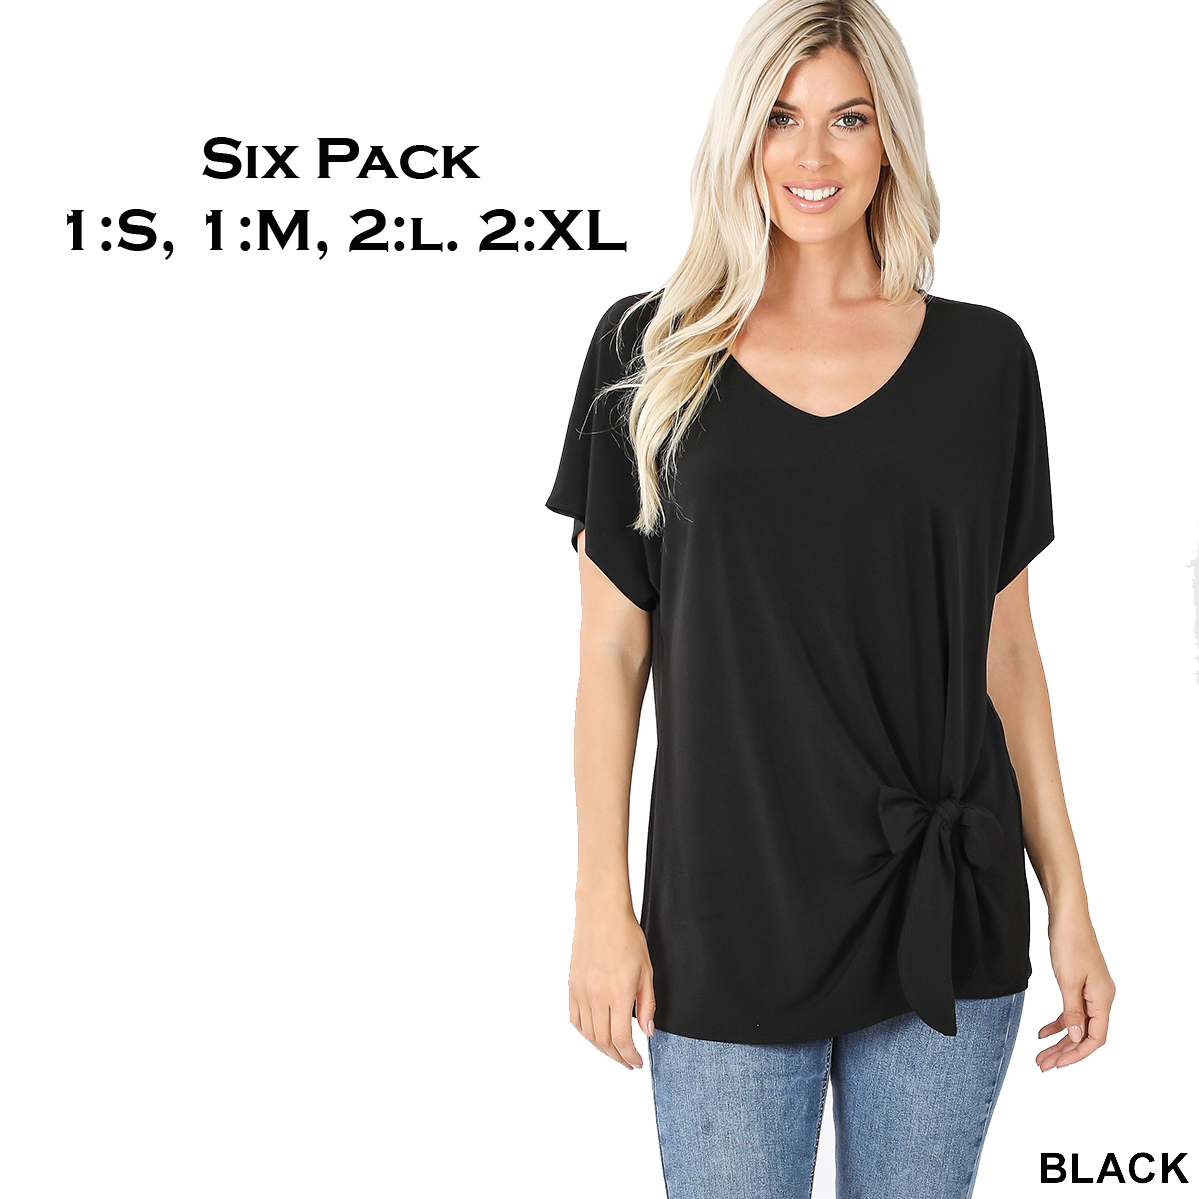 3168 Black<br>
Tie Front Top<br>
SIX PACK
